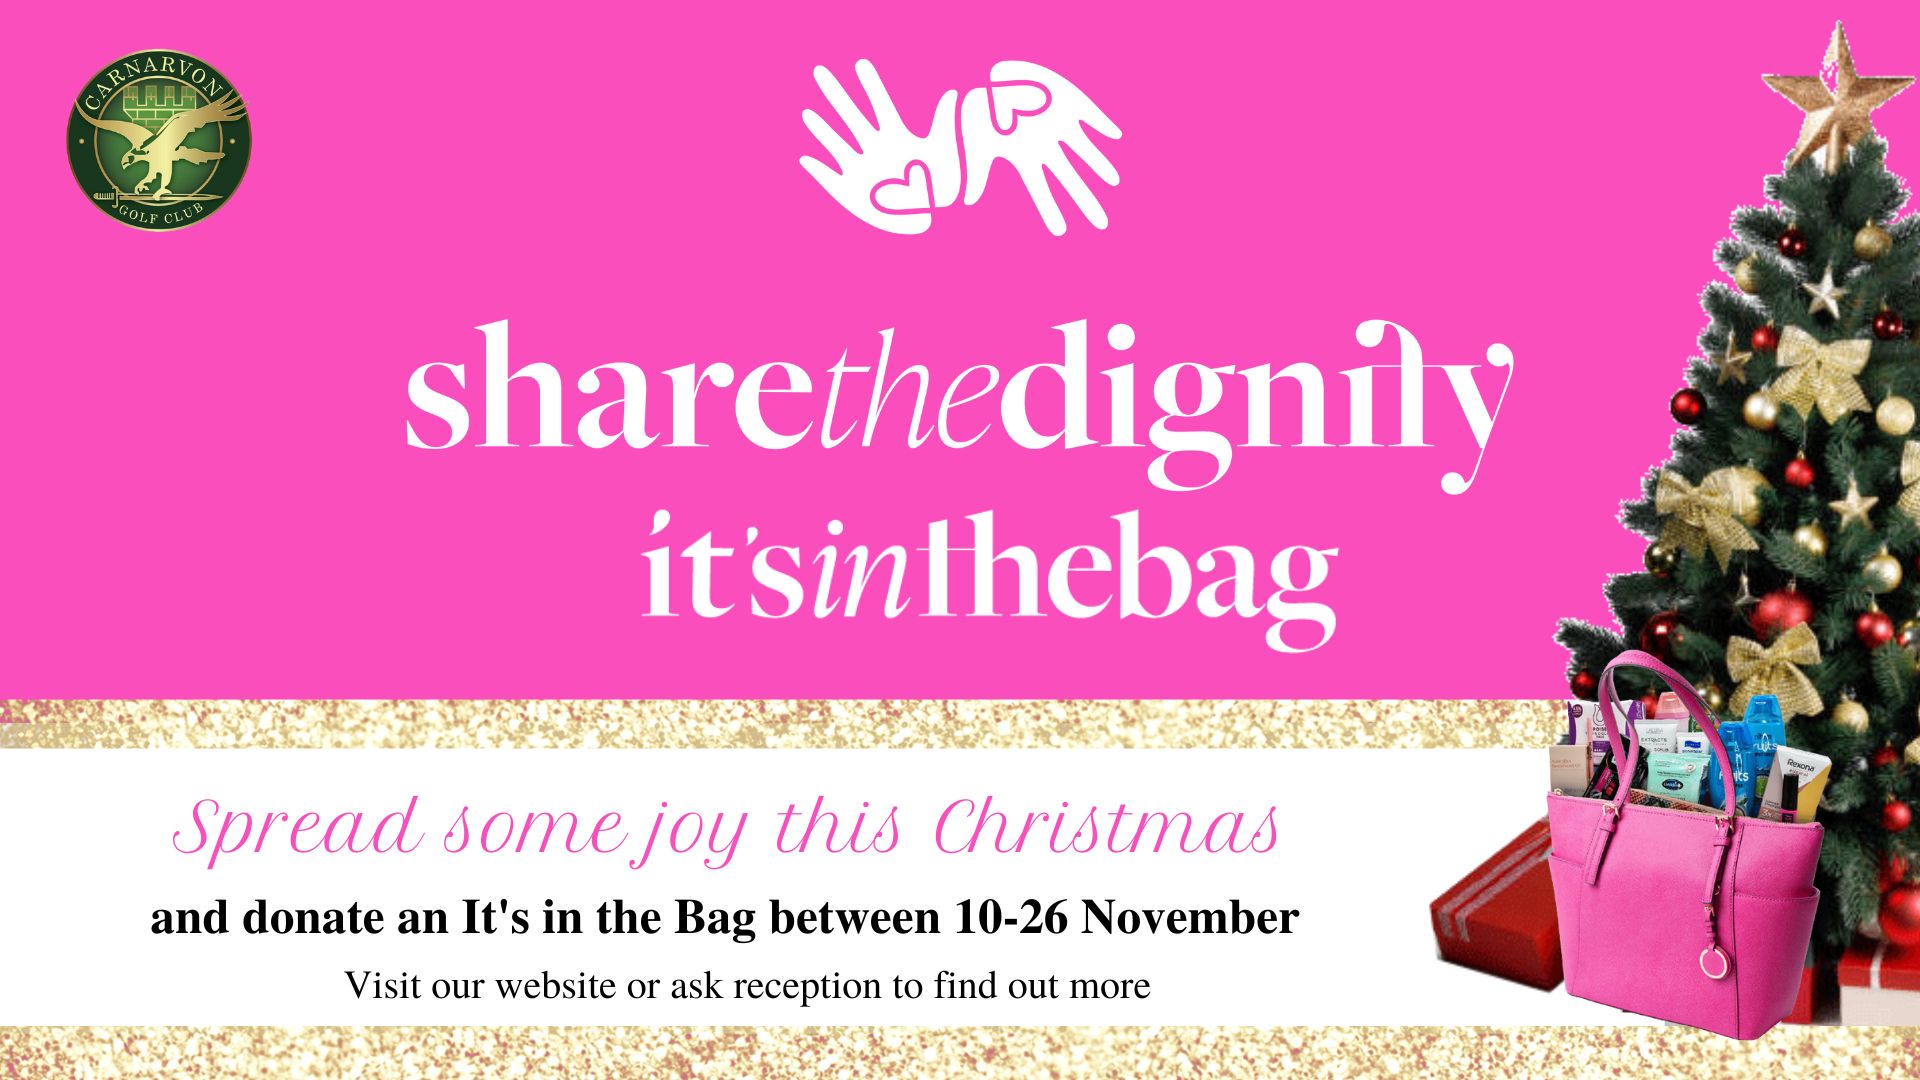 Share the Dignity